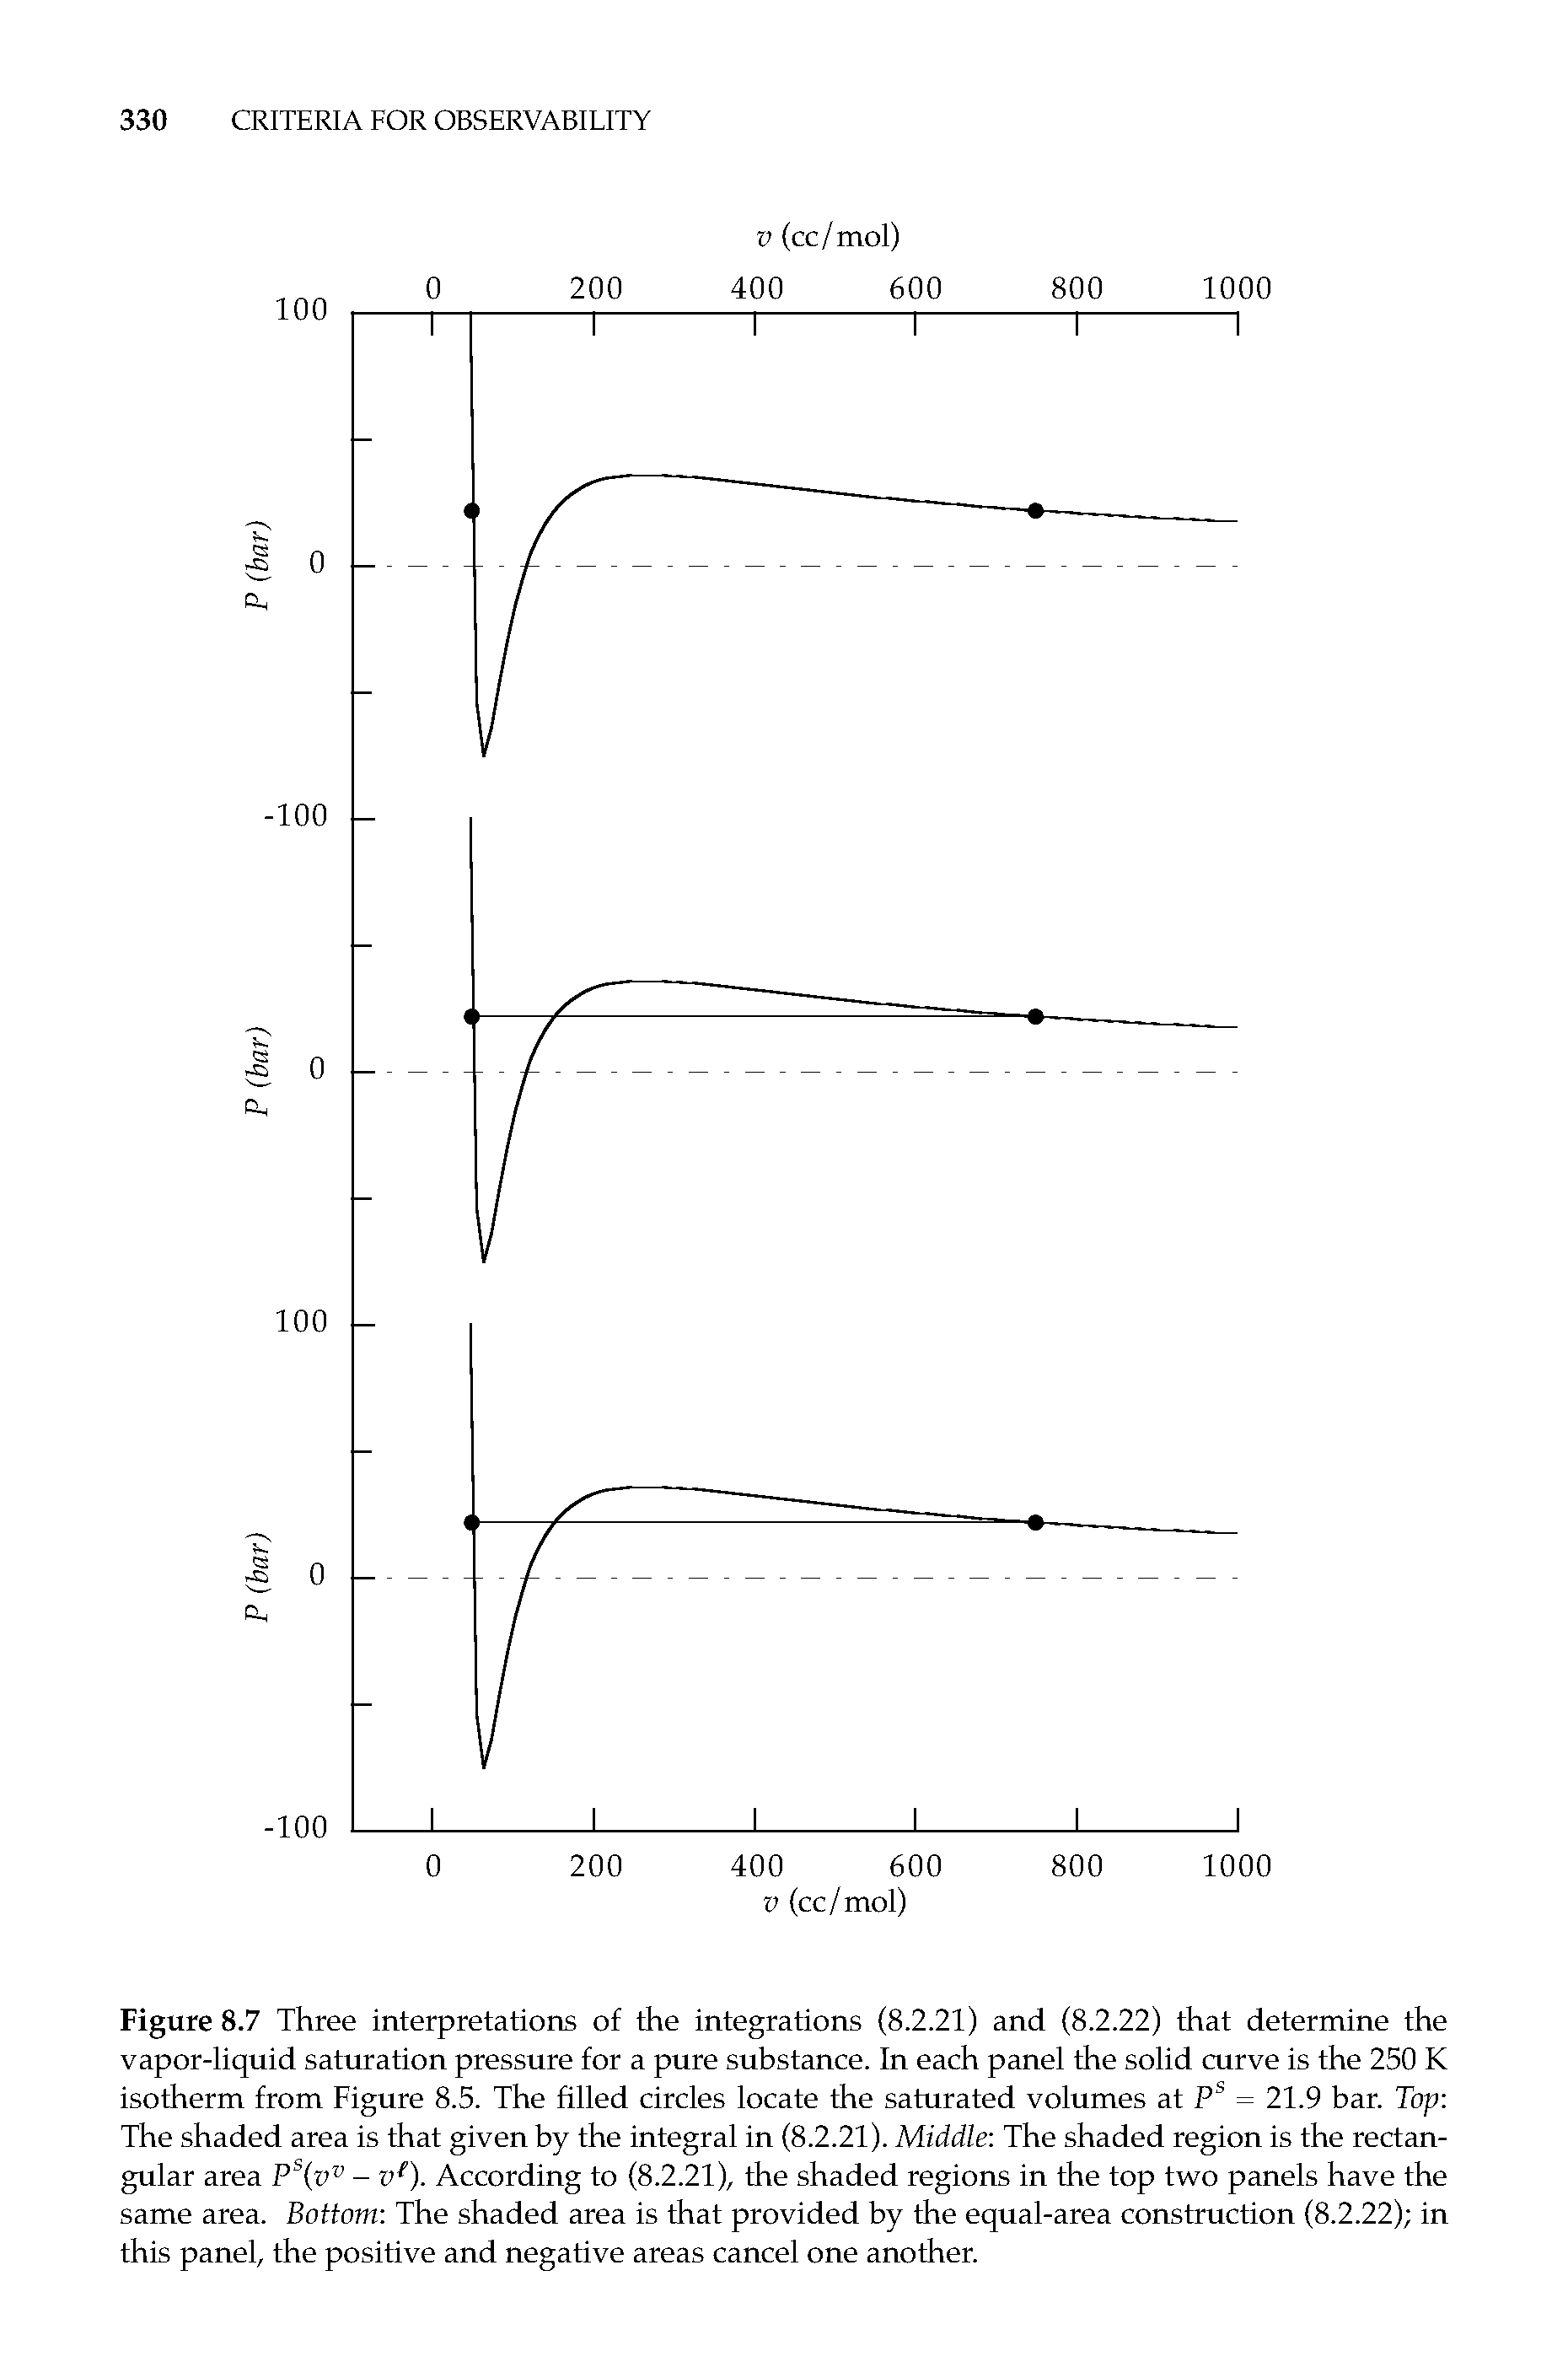 Figure 8.7 Three interpretations of the integrations (8.2.21) and (8.2.22) that determine the vapor-liquid saturation pressure for a pure substance. In each panel the solid curve is the 250 K isotherm from Figure 8.5. The filled circles locate the saturated volumes at = 21.9 bar. Top The shaded area is that given by the integral in (8.2.21). Middle The shaded region is the rectangular area P v - v ). According to (8.2.21), the shaded regions in the top two panels have the same area. Bottom The shaded area is that provided by the equal-area construction (8.2.22) in this panel, the positive and negative areas cancel one another.